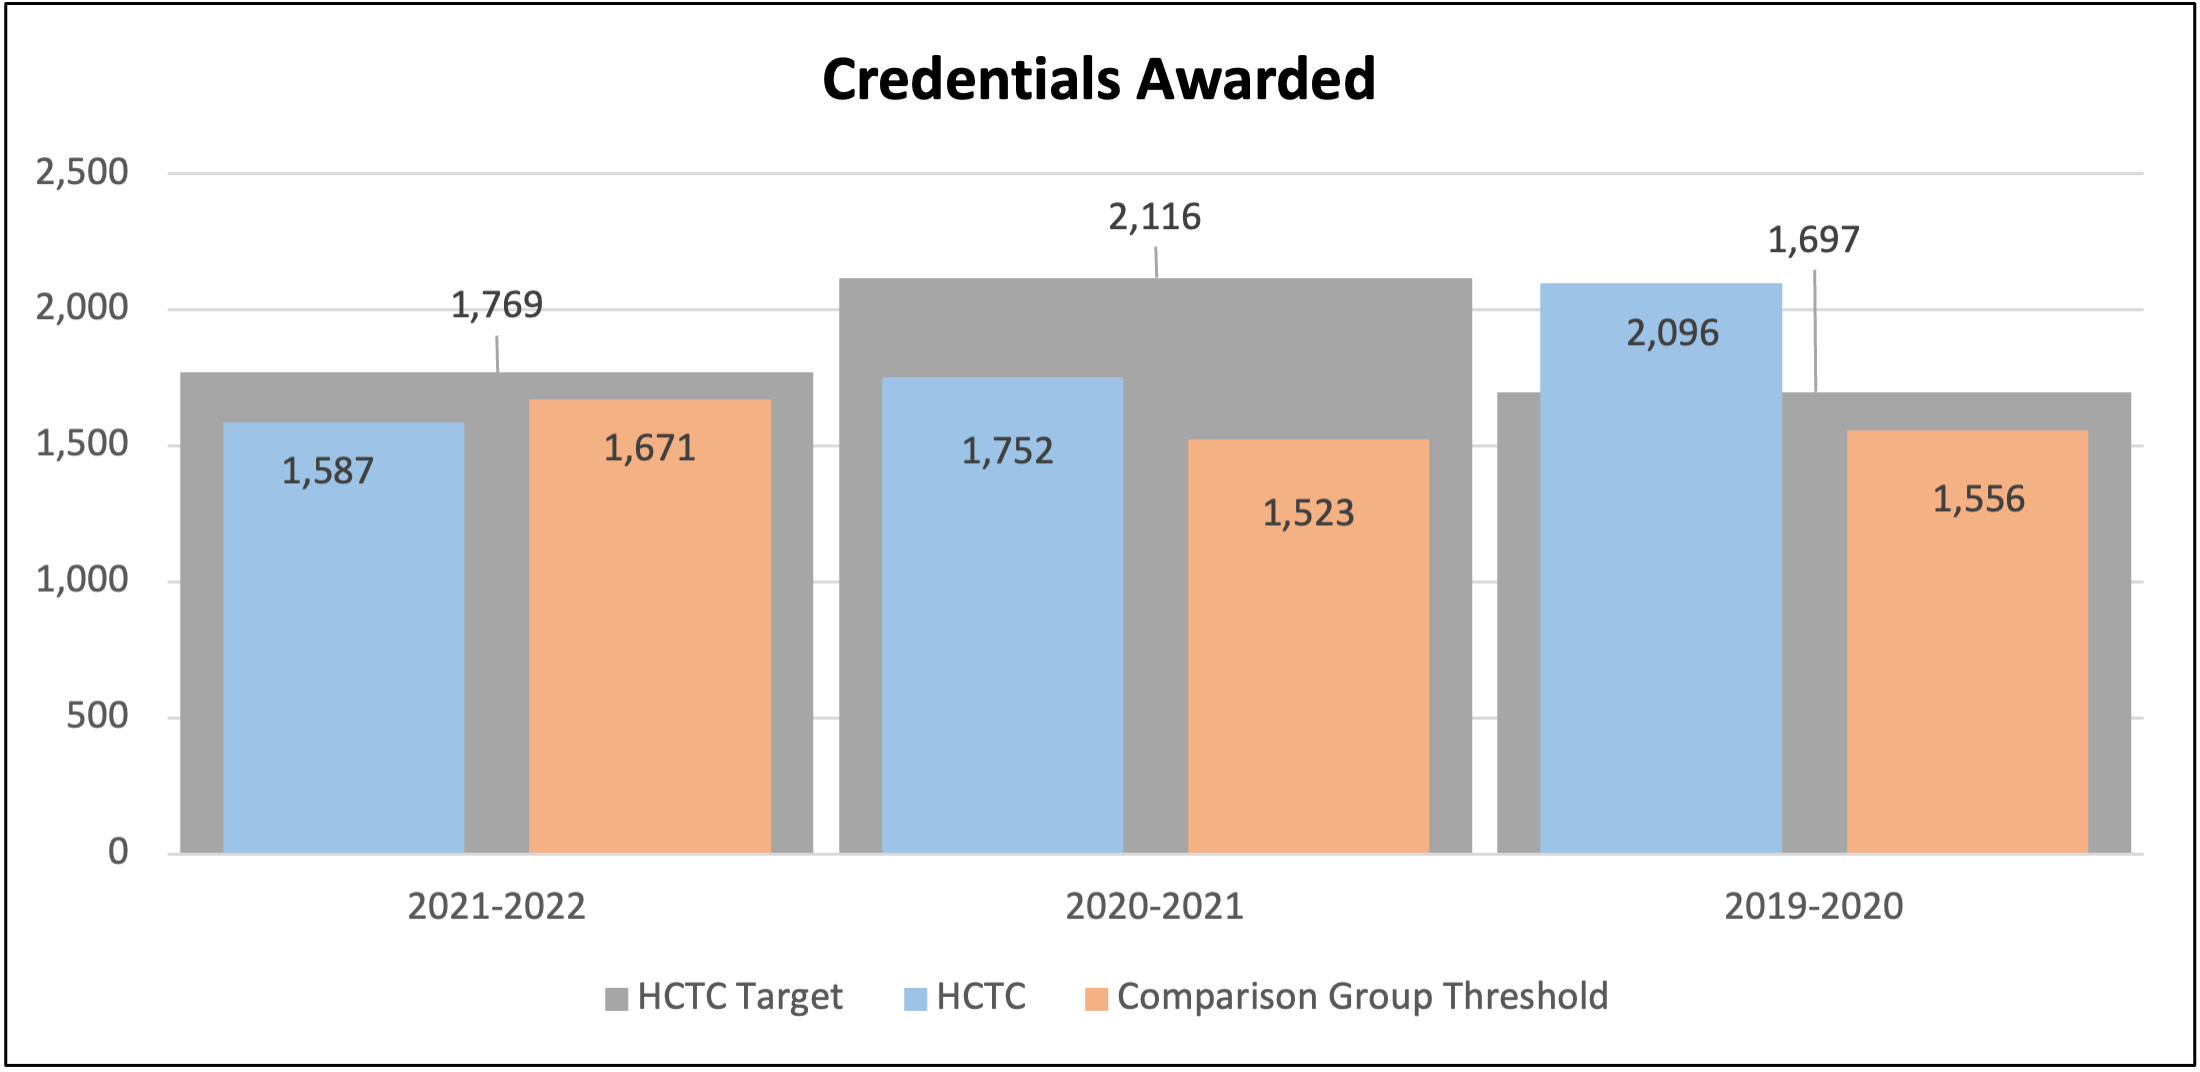 Credentials Awarded: Measured by the total number of credentials (degrees, diplomas, and certificates) awarded for the academic year.